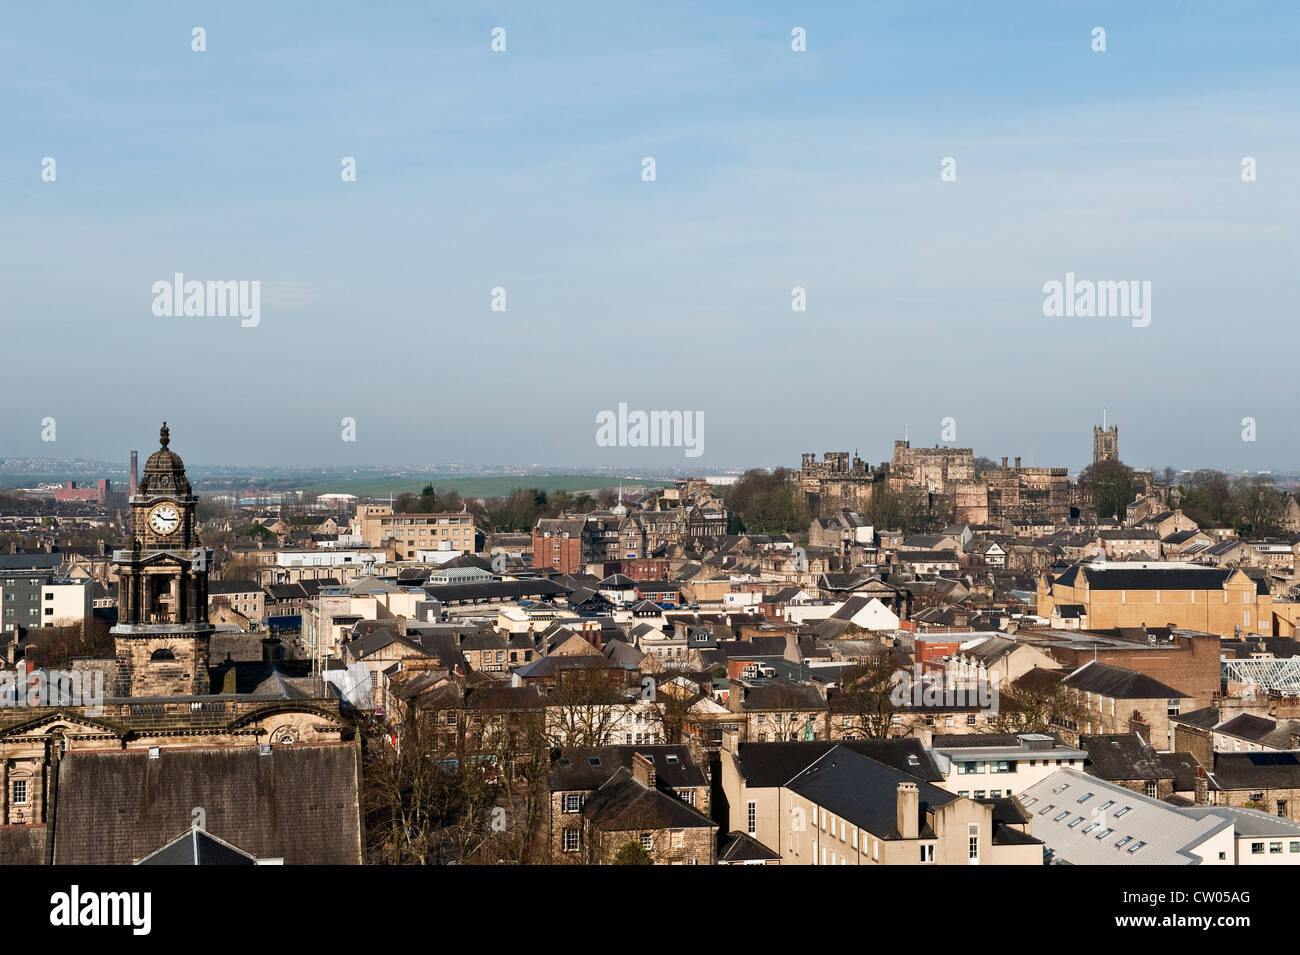 View over the city of Lancaster, UK, seen from the tower of St Peter's Cathedral, with the old prison of Lancaster Castle in the background Stock Photo